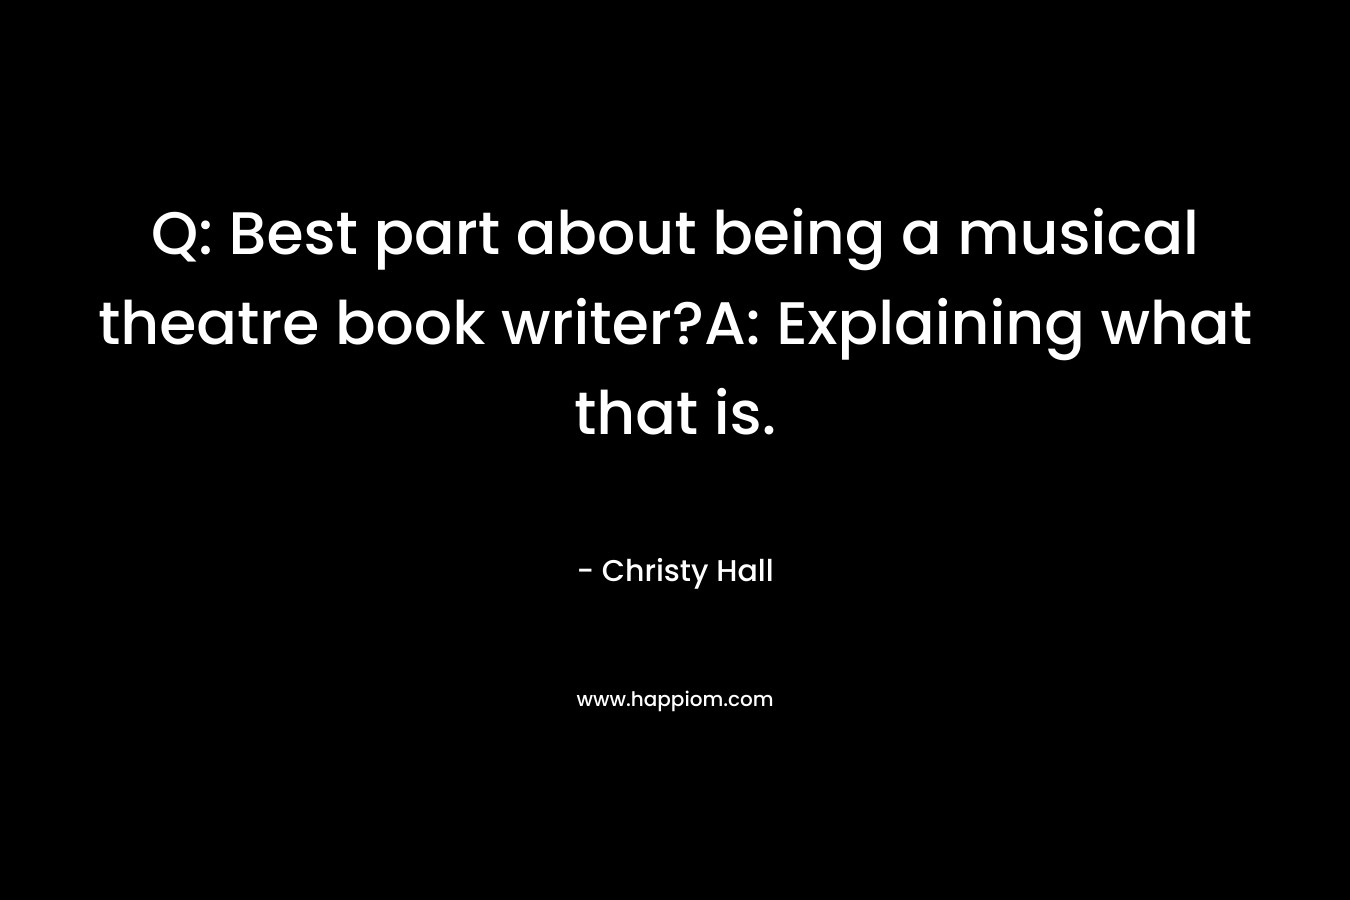 Q: Best part about being a musical theatre book writer?A: Explaining what that is.